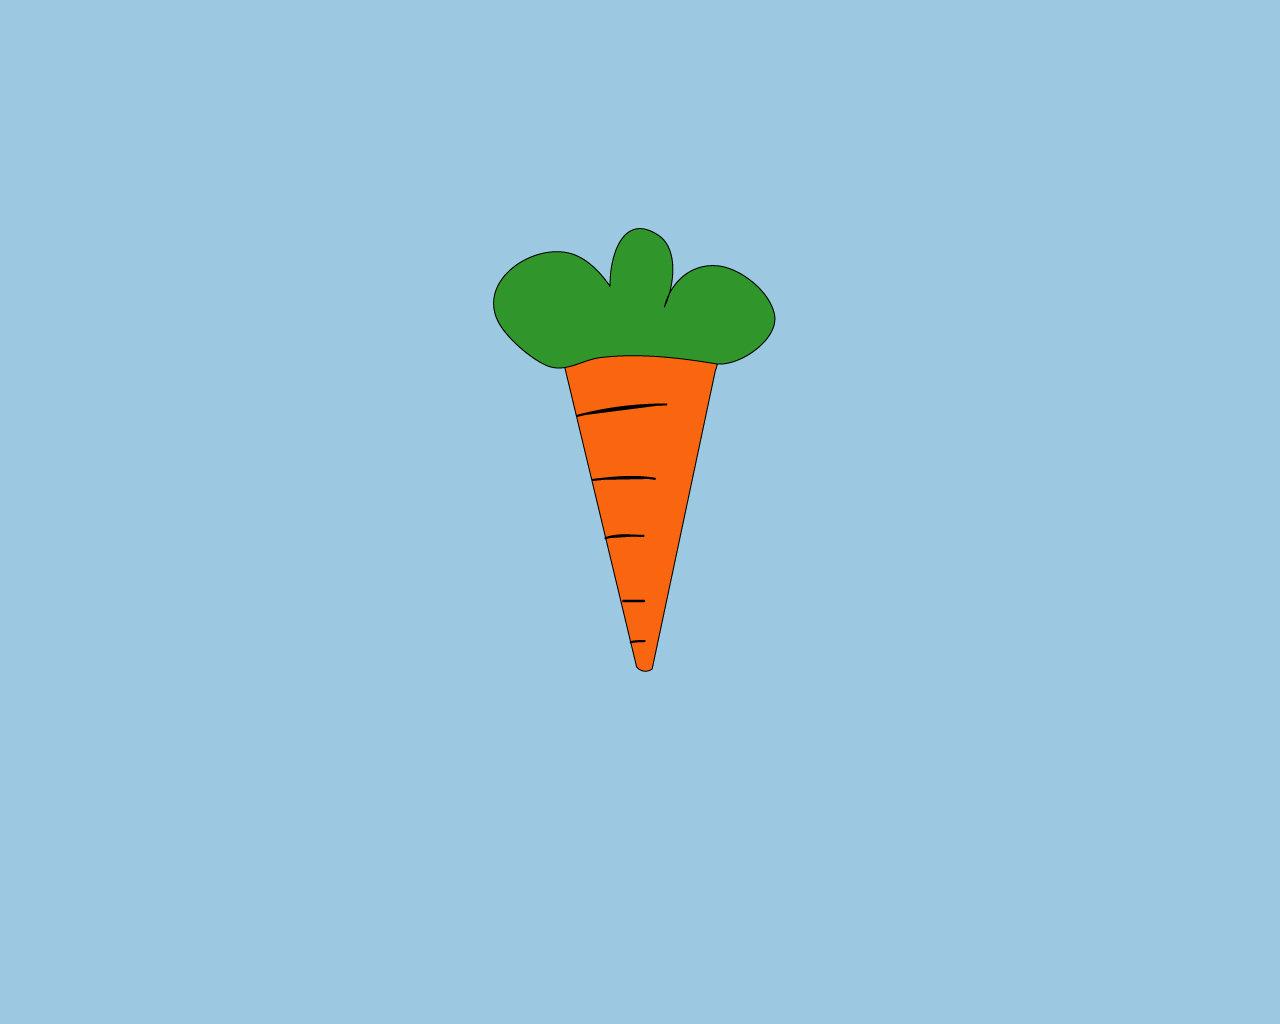 Carrot Wallpaper Group , Download for free